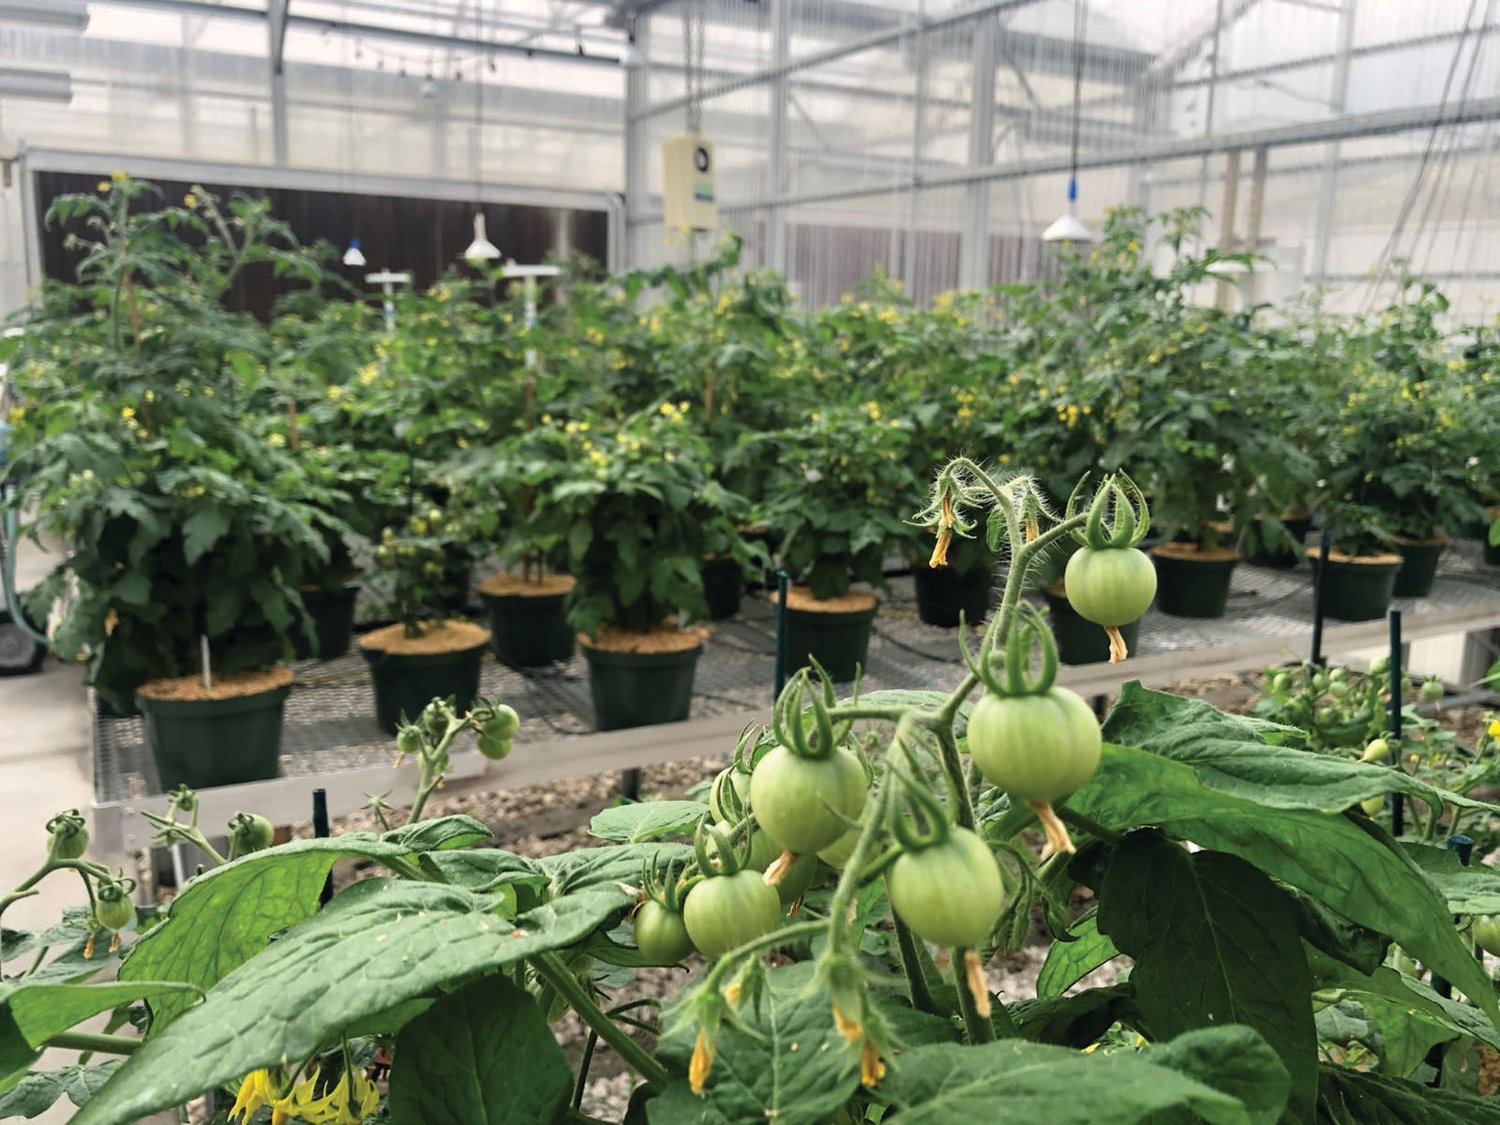 UF professors Celina Gomez and Paul Fisher are researching and educating the public about the best varieties of tomatoes, strawberries and more to grow indoors.